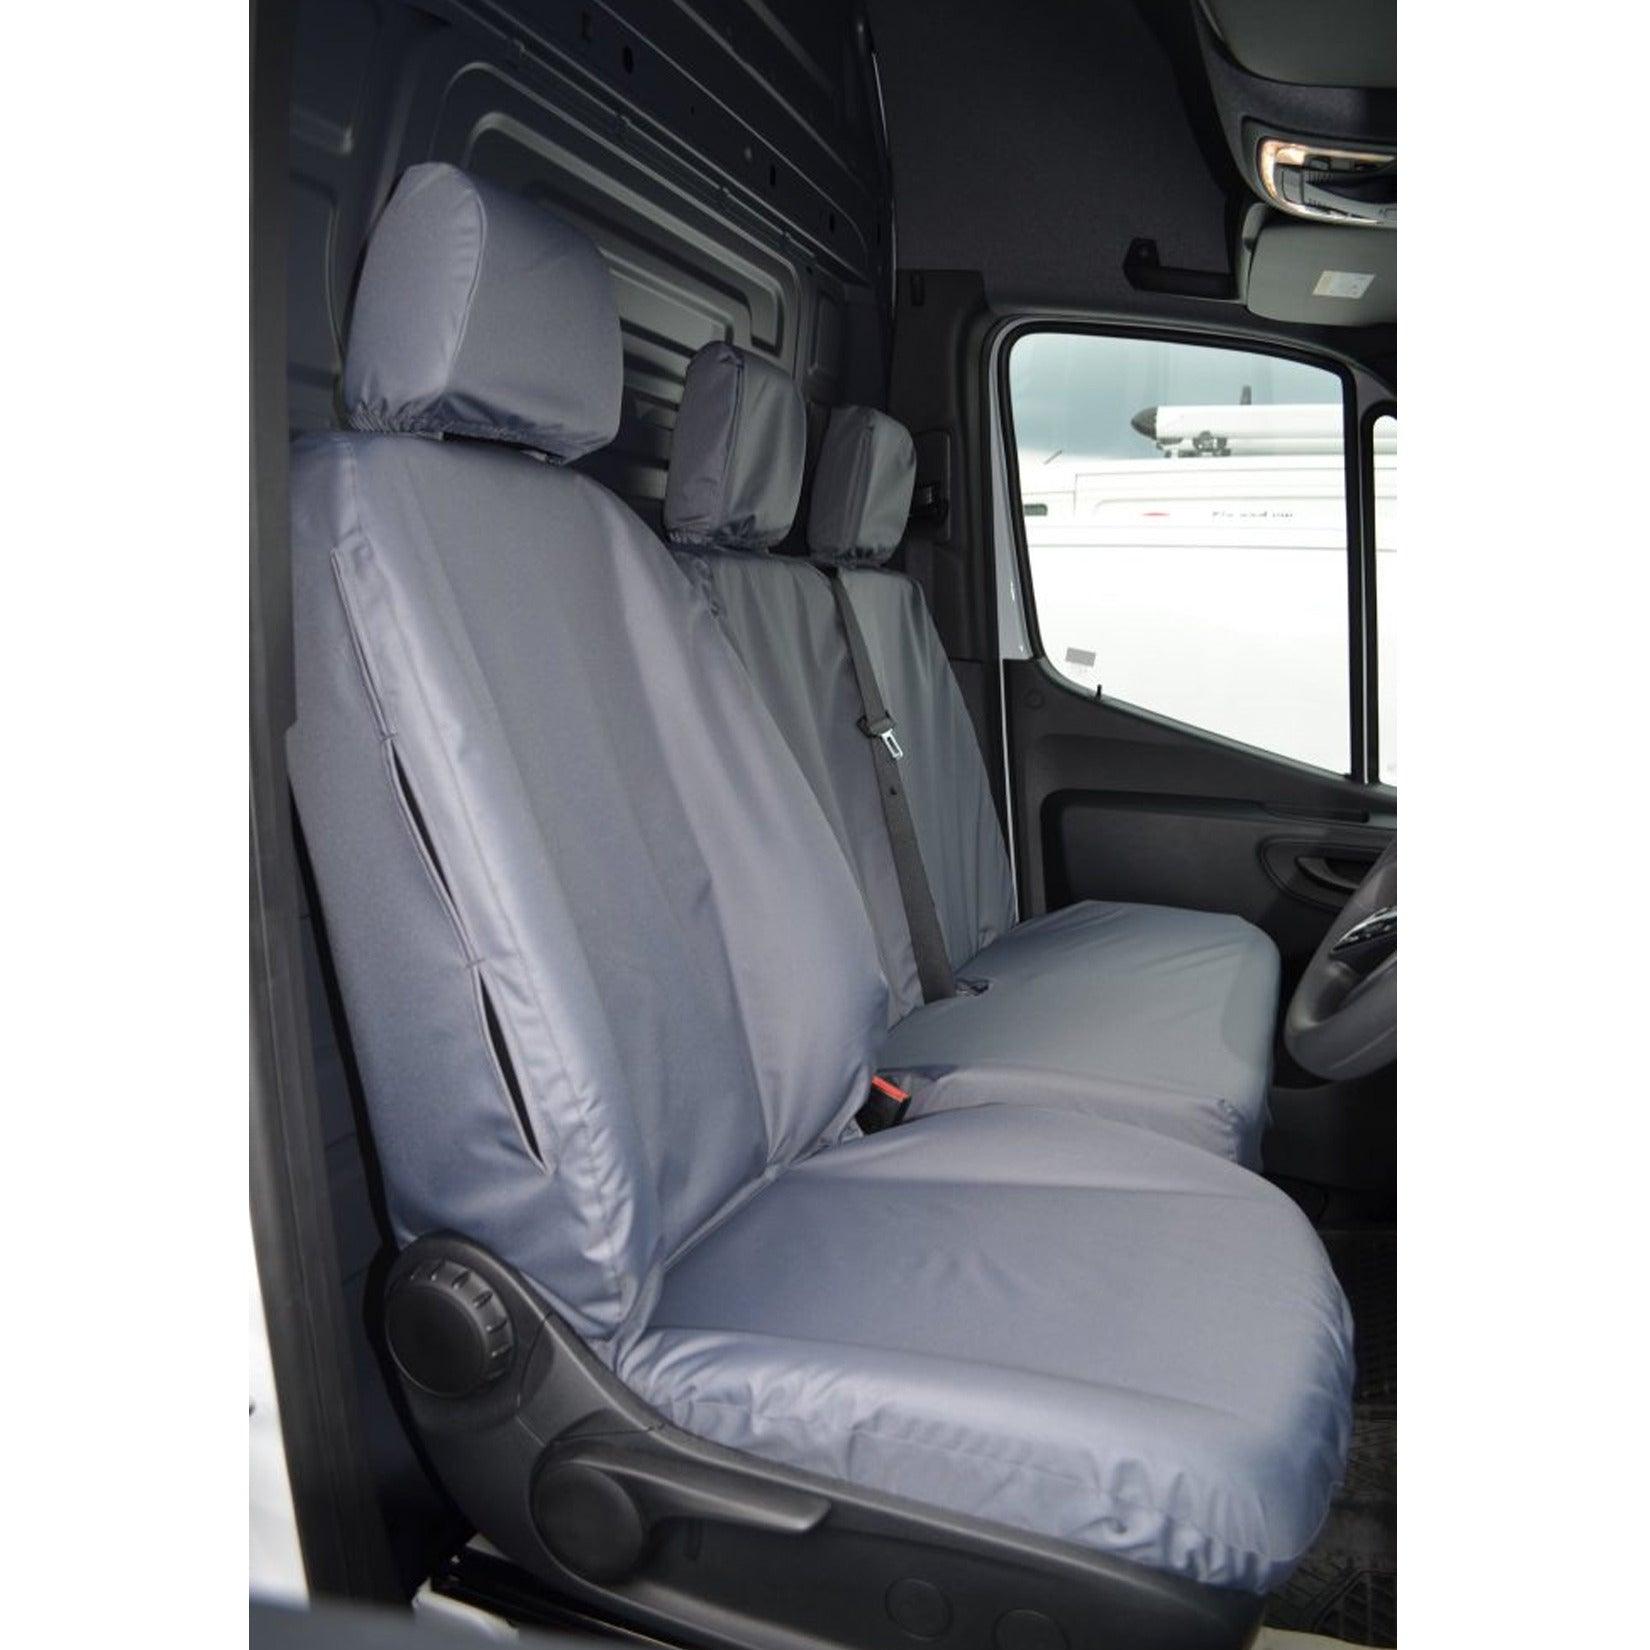 MERCEDES SPRINTER 2018 ON DRIVER AND FRONT DOUBLE PASSENGER SEAT COVERS - GREY - Storm Xccessories2